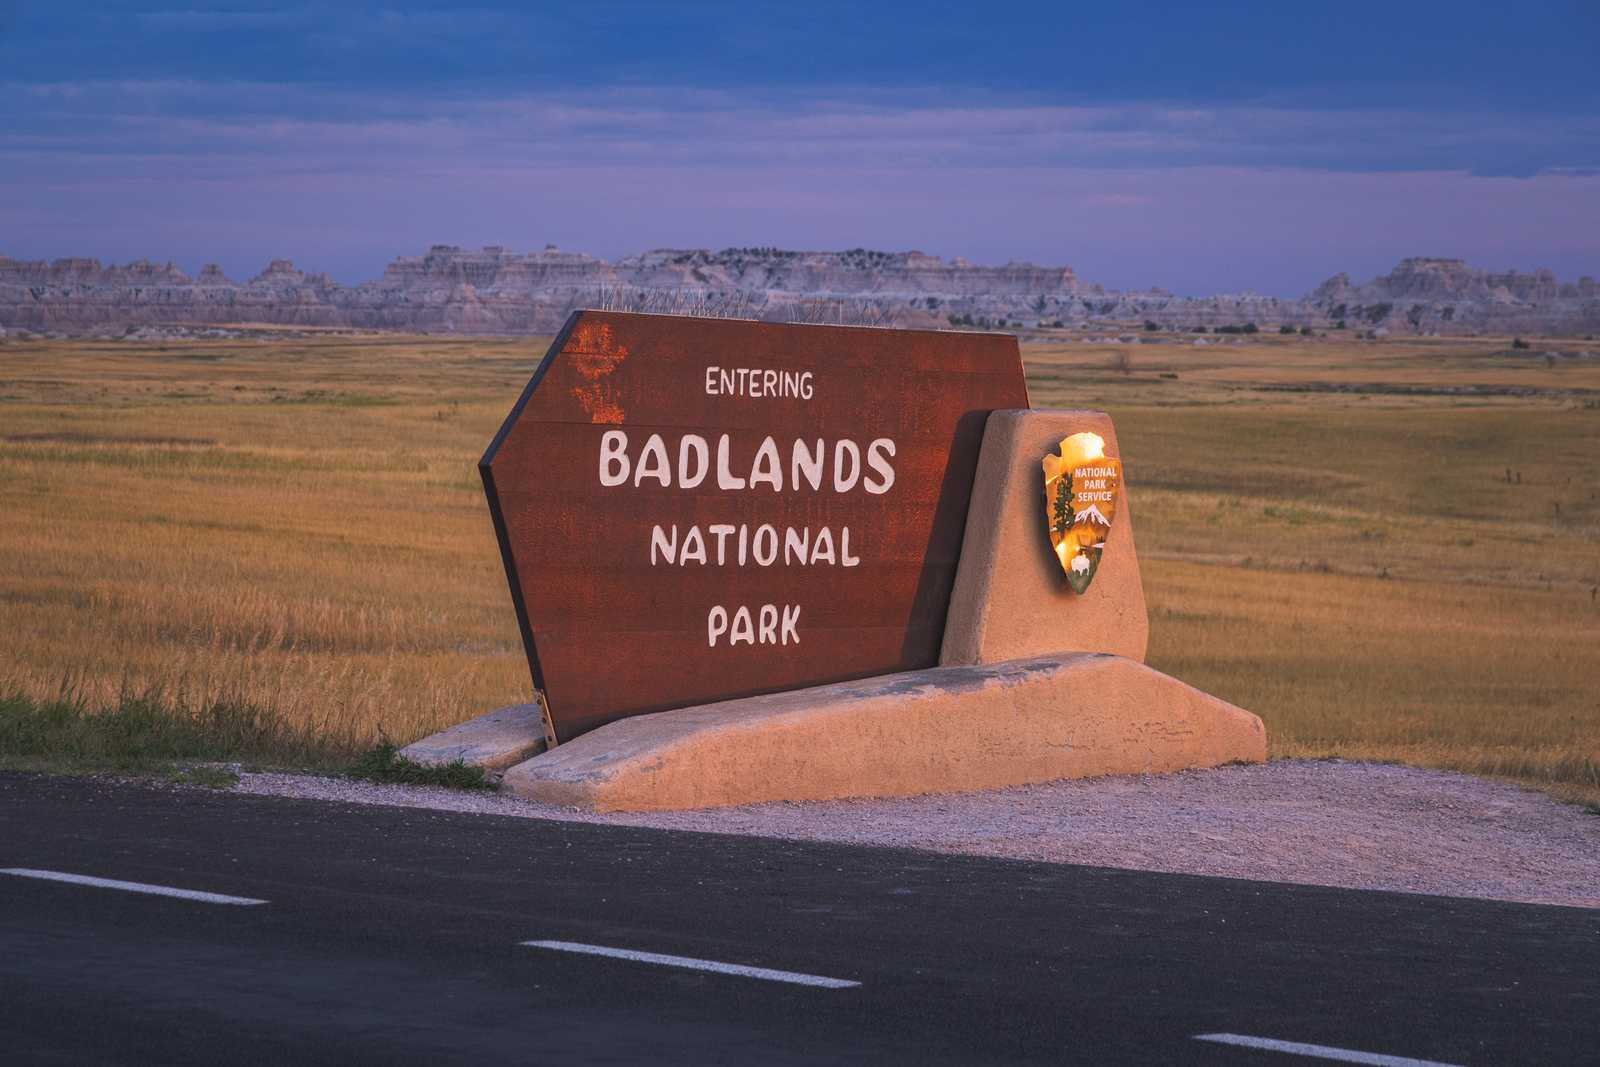 The Badlands National Park entrance sign in the characteristic rounded font of National Parks Service signs as light falls and the sky turns a purplish blue in the background